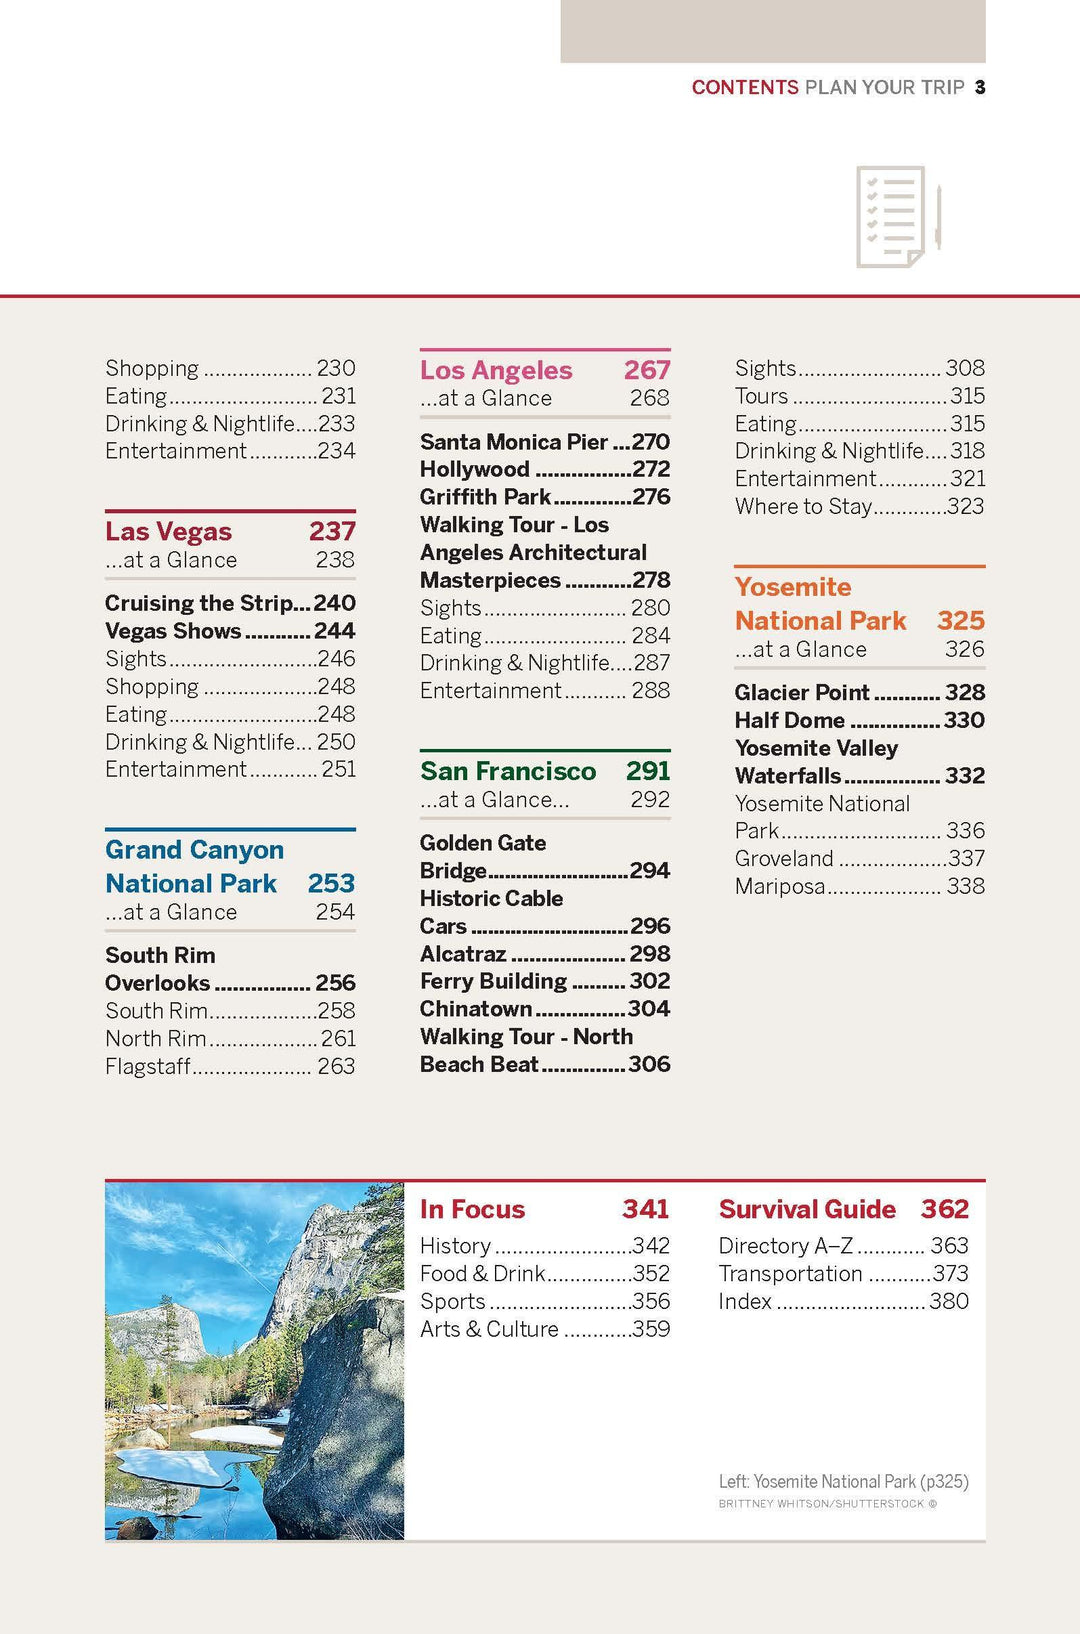 Guide de voyage (en anglais) - Best of USA | Lonely Planet guide de voyage Lonely Planet 